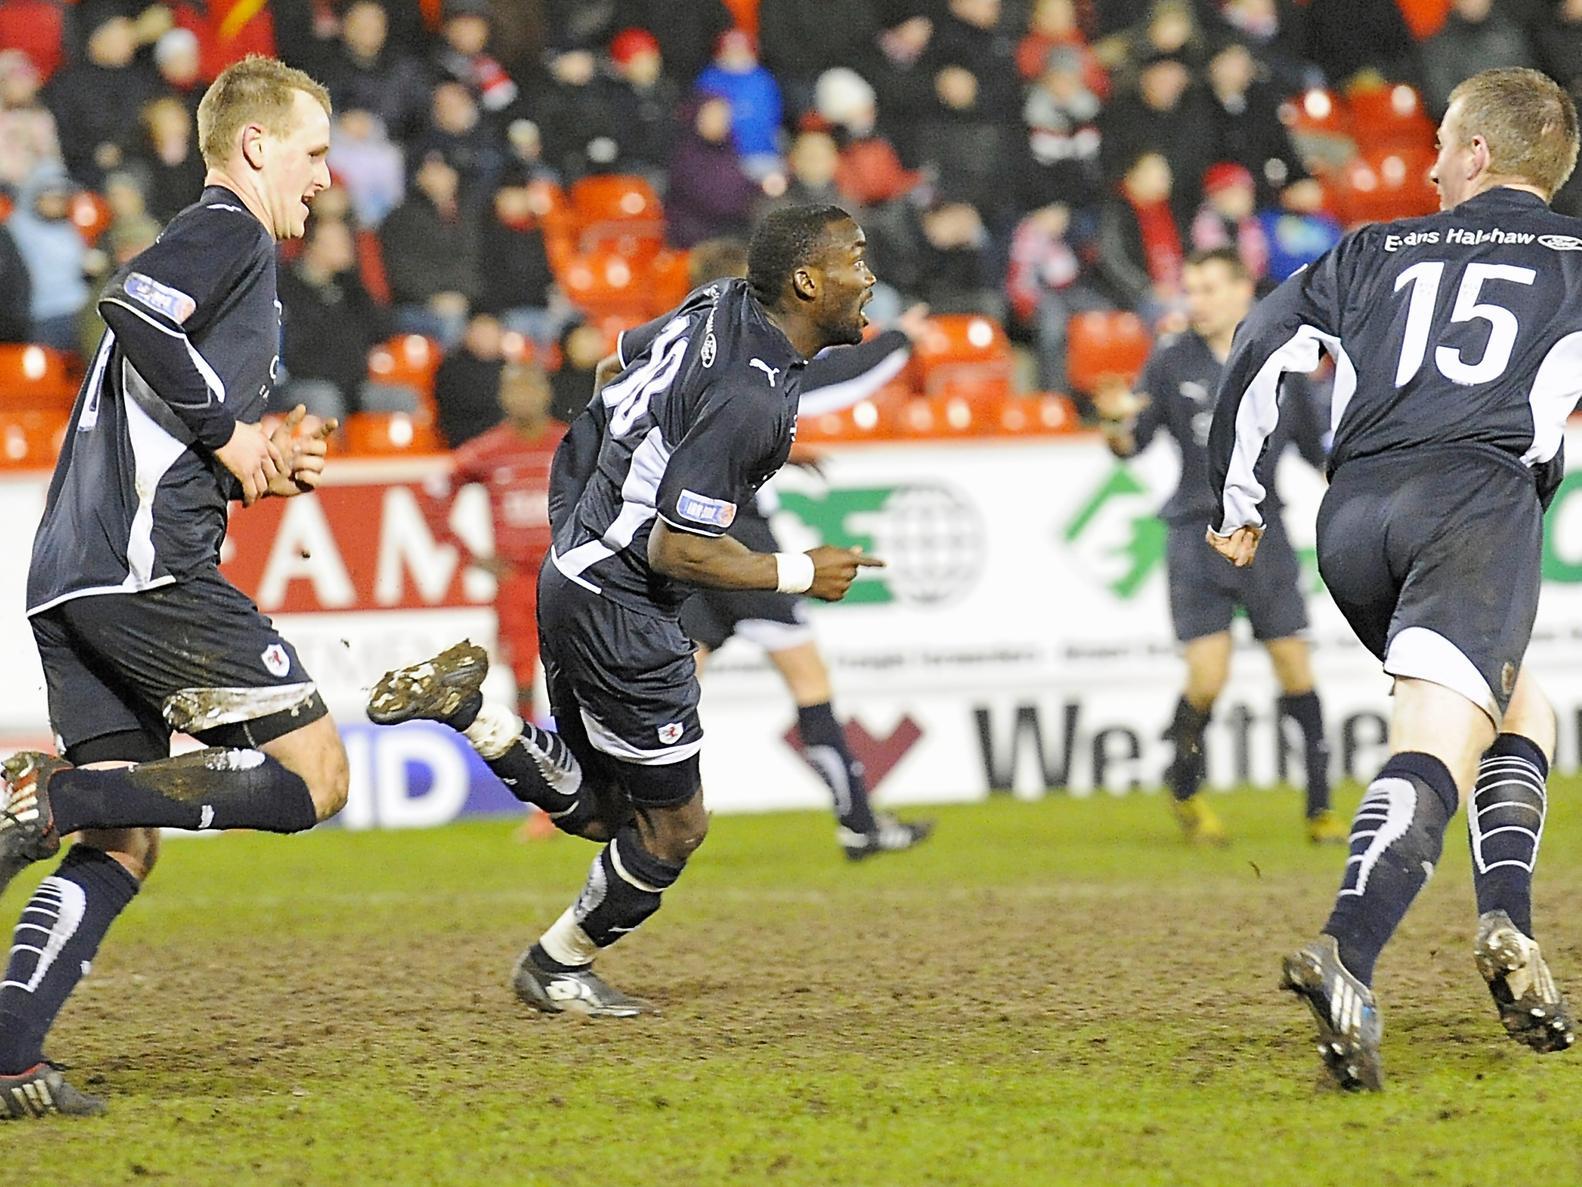 After a 1-1 draw at Stark's Park on the Saturday, a Gregory Tade goal secured a 1-0 win for John McGlynn's under-strength Raith Rovers side in this midweek Scottish Cup replay against Mark McGhee's Aberdeen at Pittodrie.